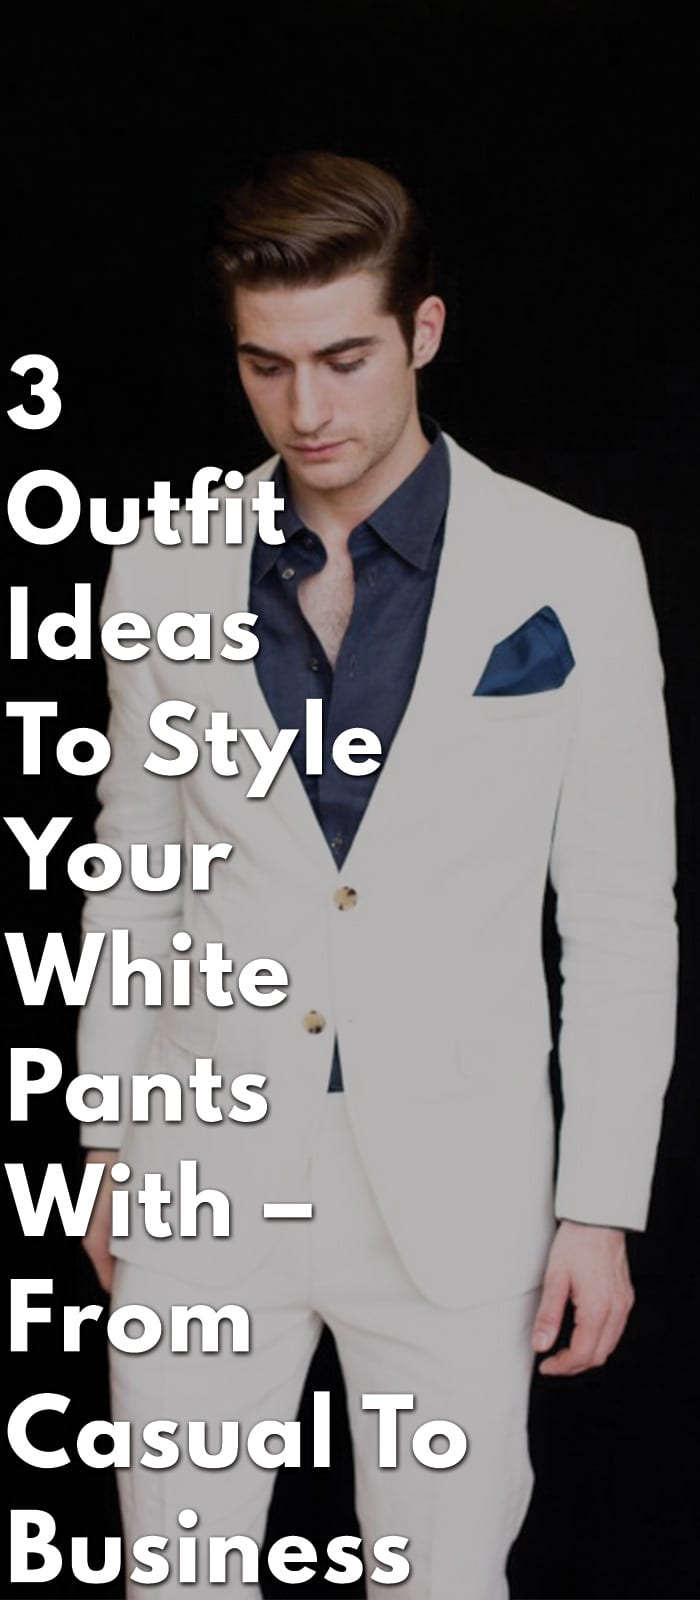 3-Outfit-Ideas-To-Style-Your-White-Pants-With-–-From-Casual-To-Business